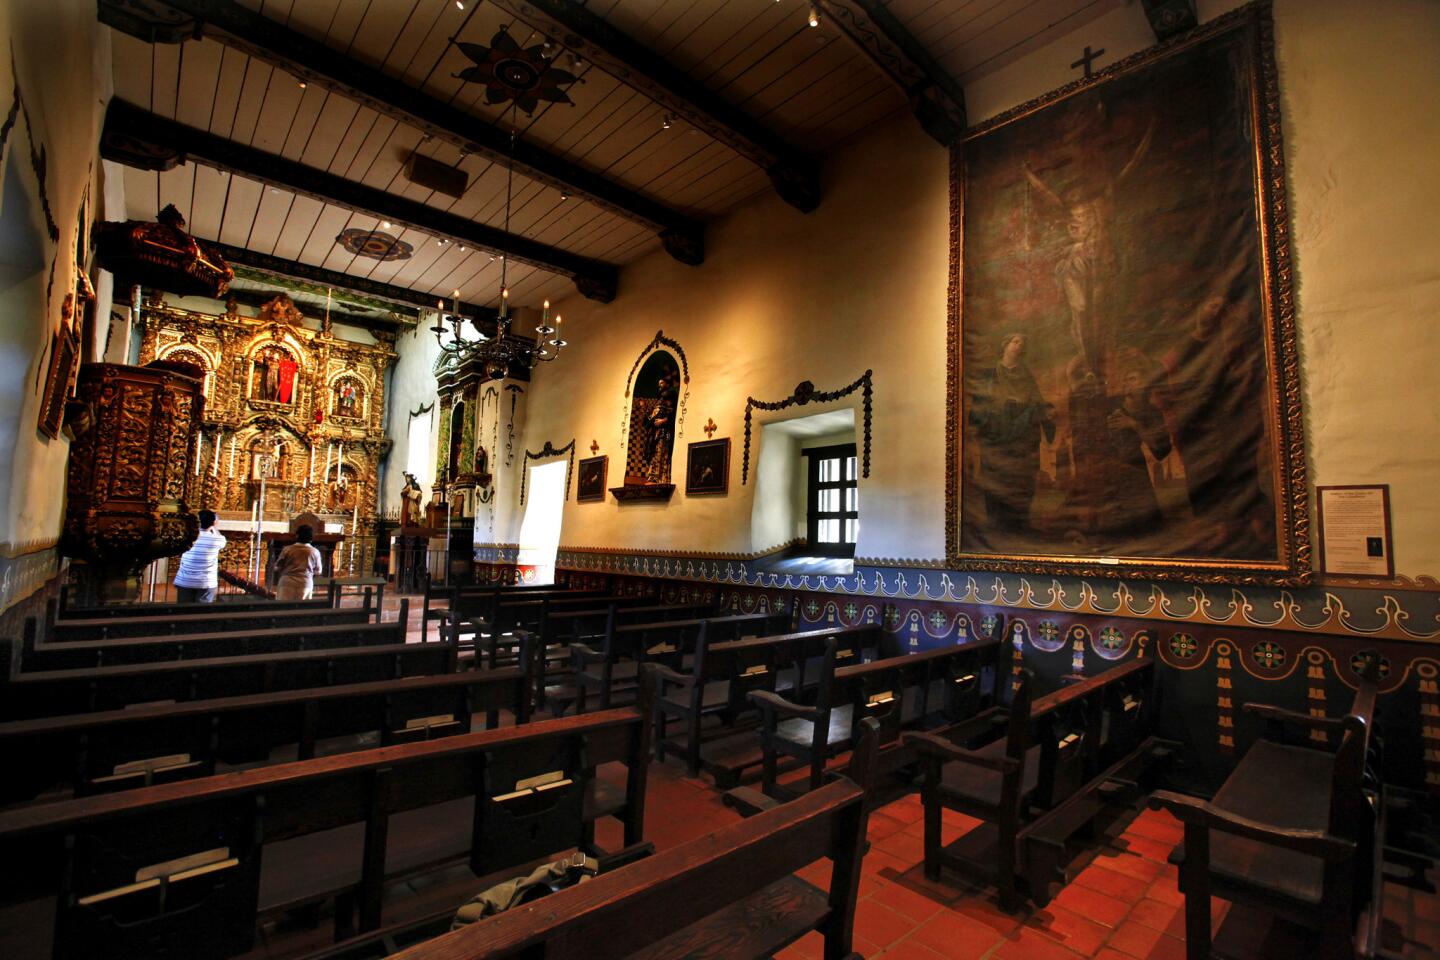 The 213-year-old painting of the Crucifixion currently hanging in the Serra Chapel (right) at Mission San Juan Capistrano was only recently revealed. It is believed to have been brought to the mission from Mexico.